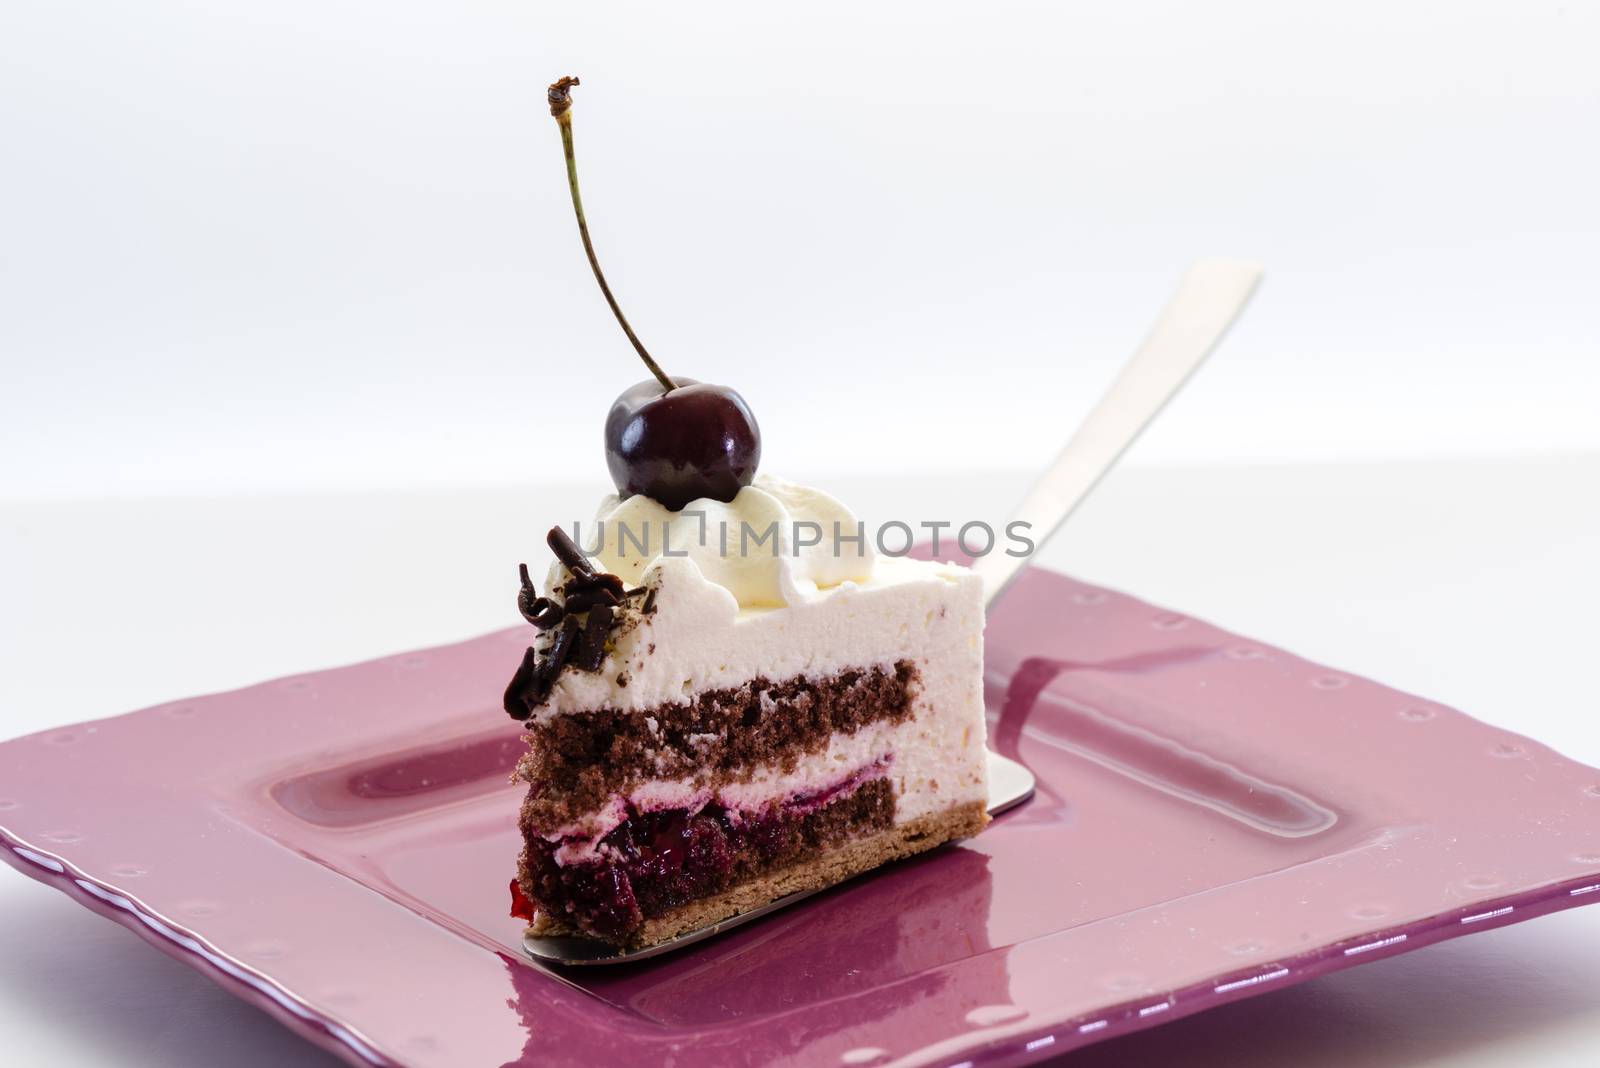 One piece on black forest cake